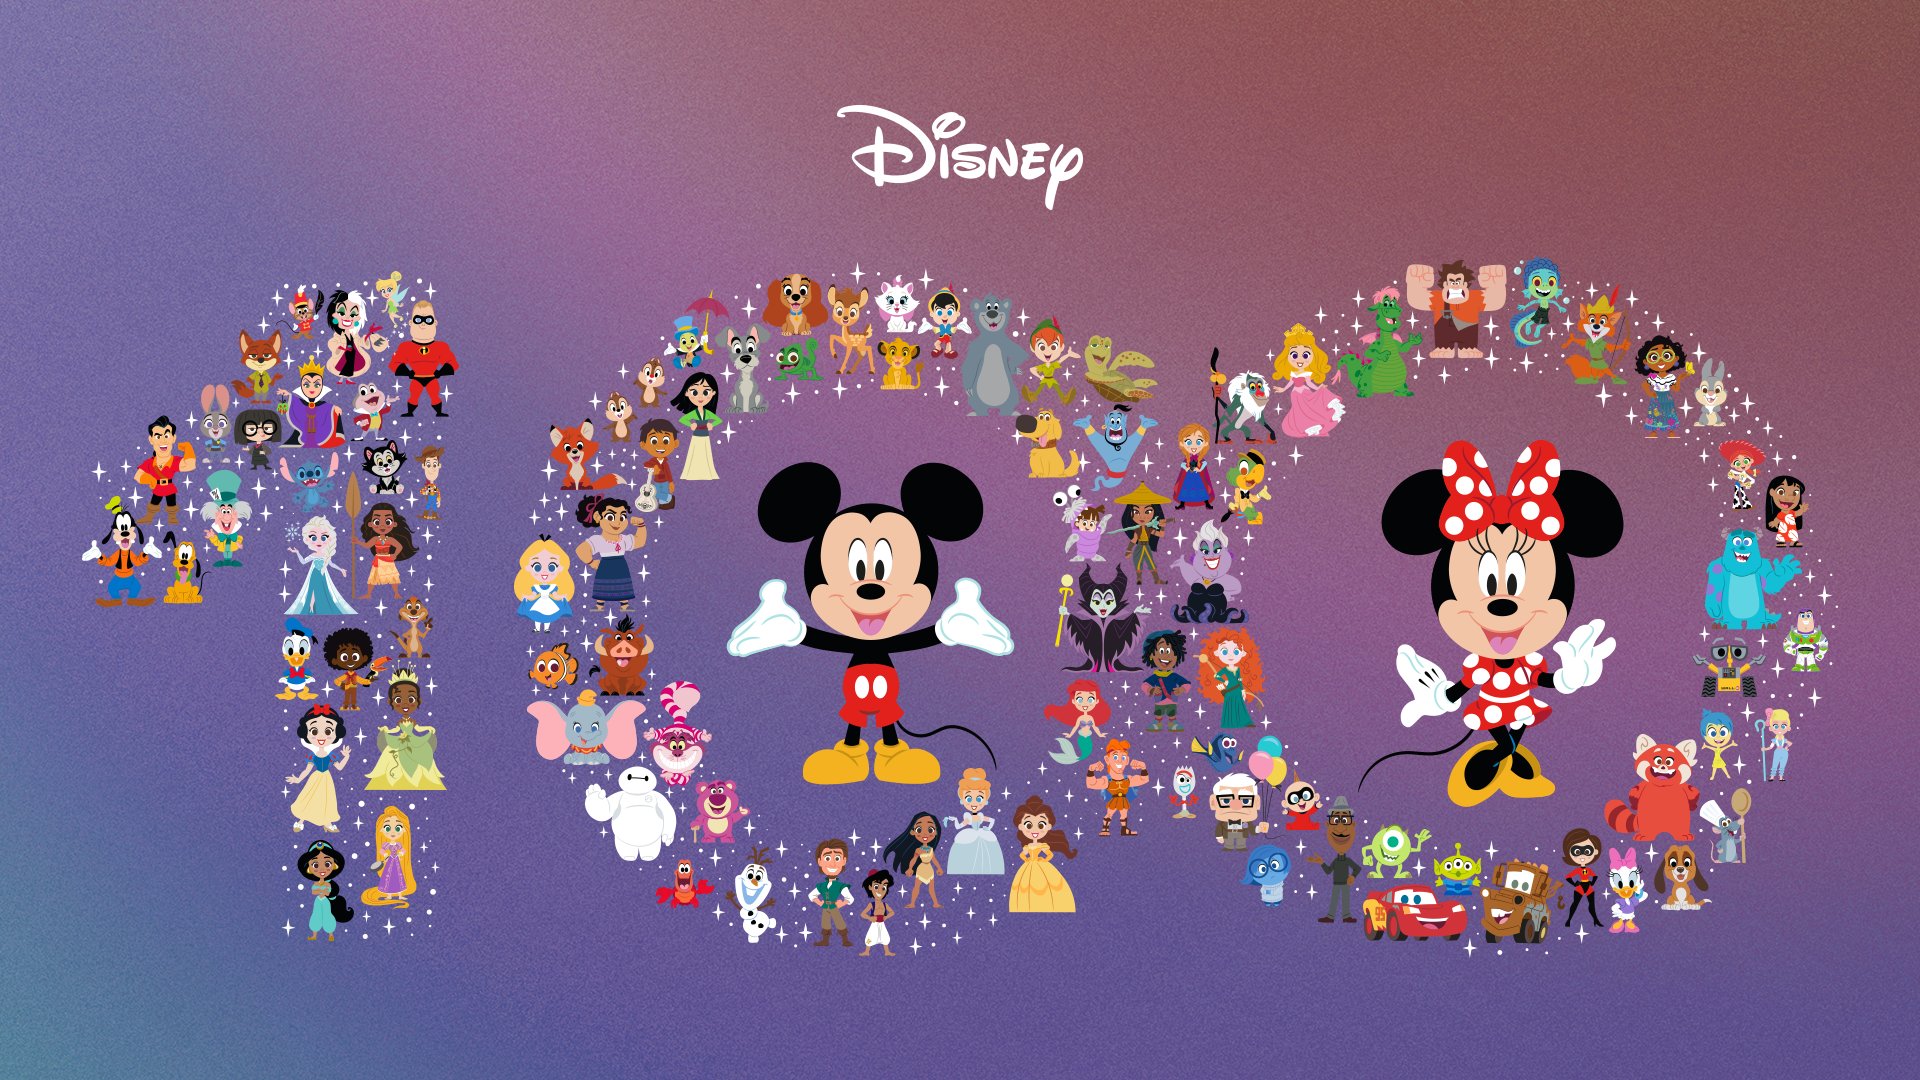 Disney on X: Today we celebrate a century of unforgettable magic